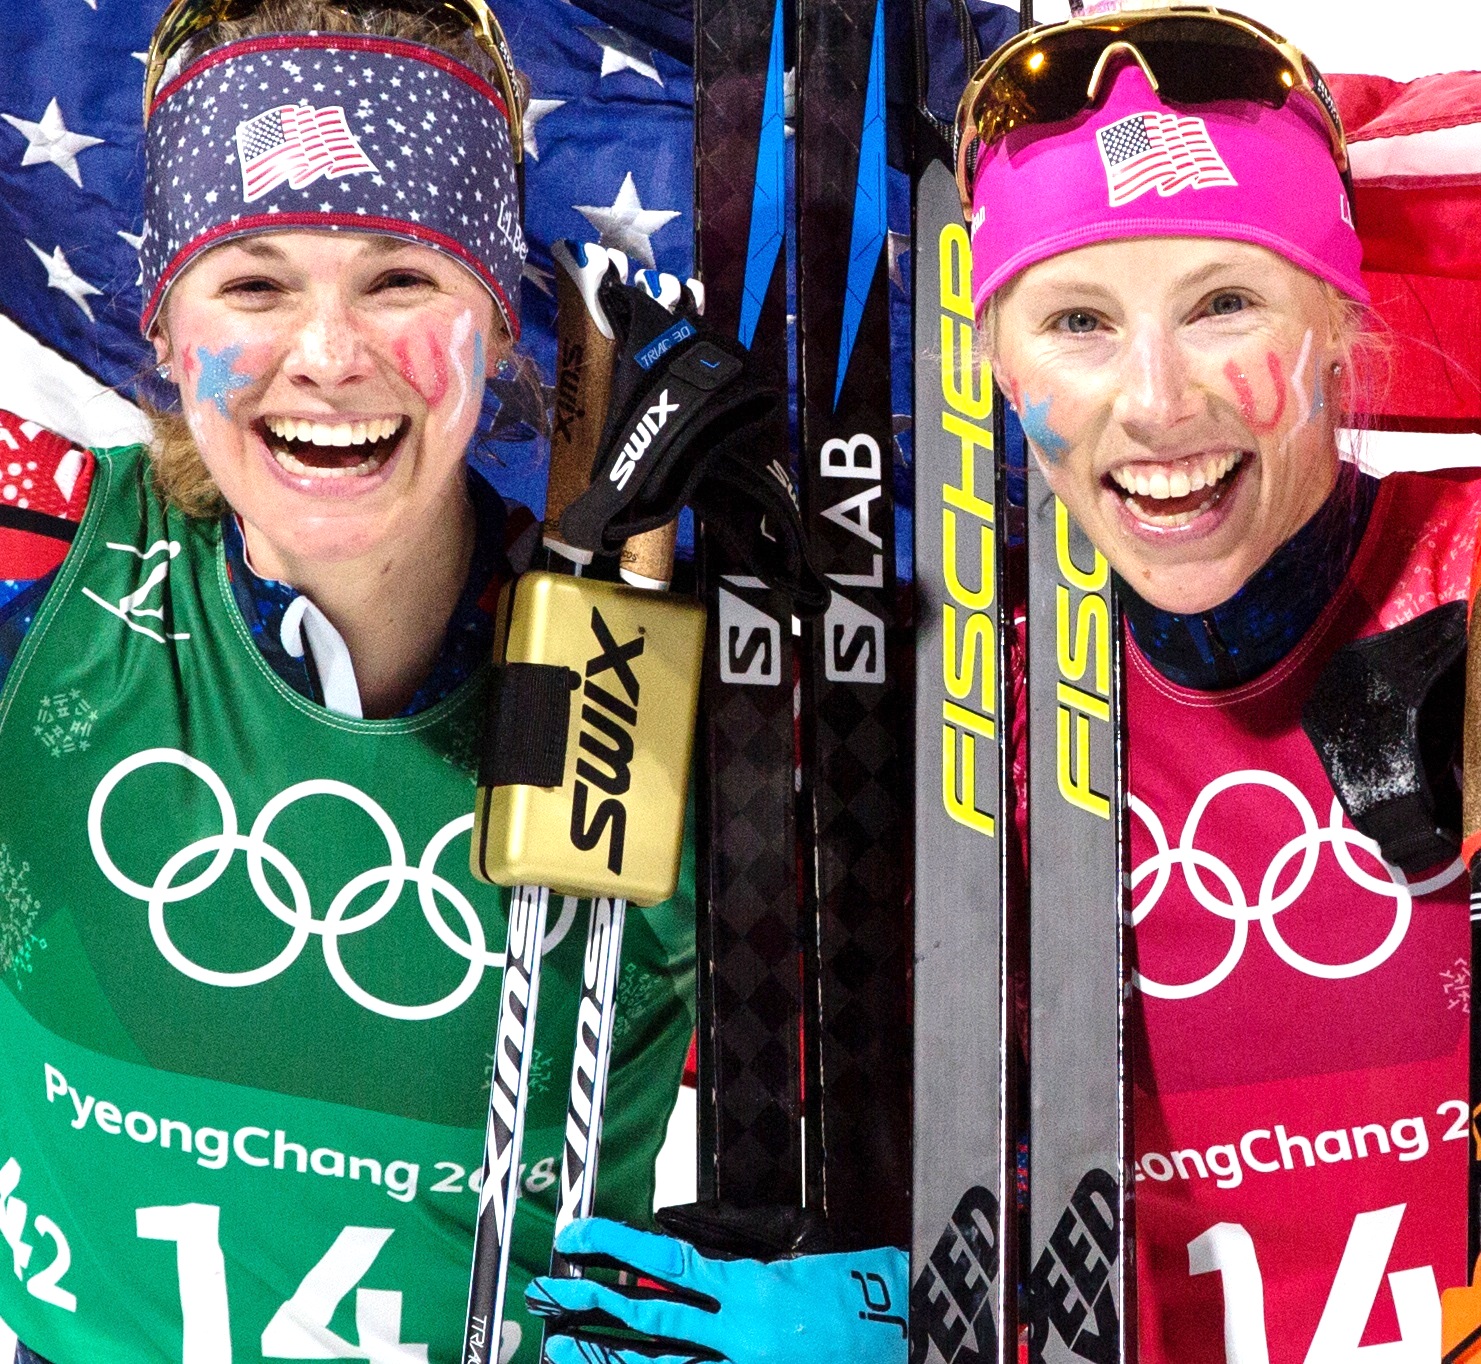 USA’s Diggins & Randall Win Historic Olympic Gold in Women’s Team ...